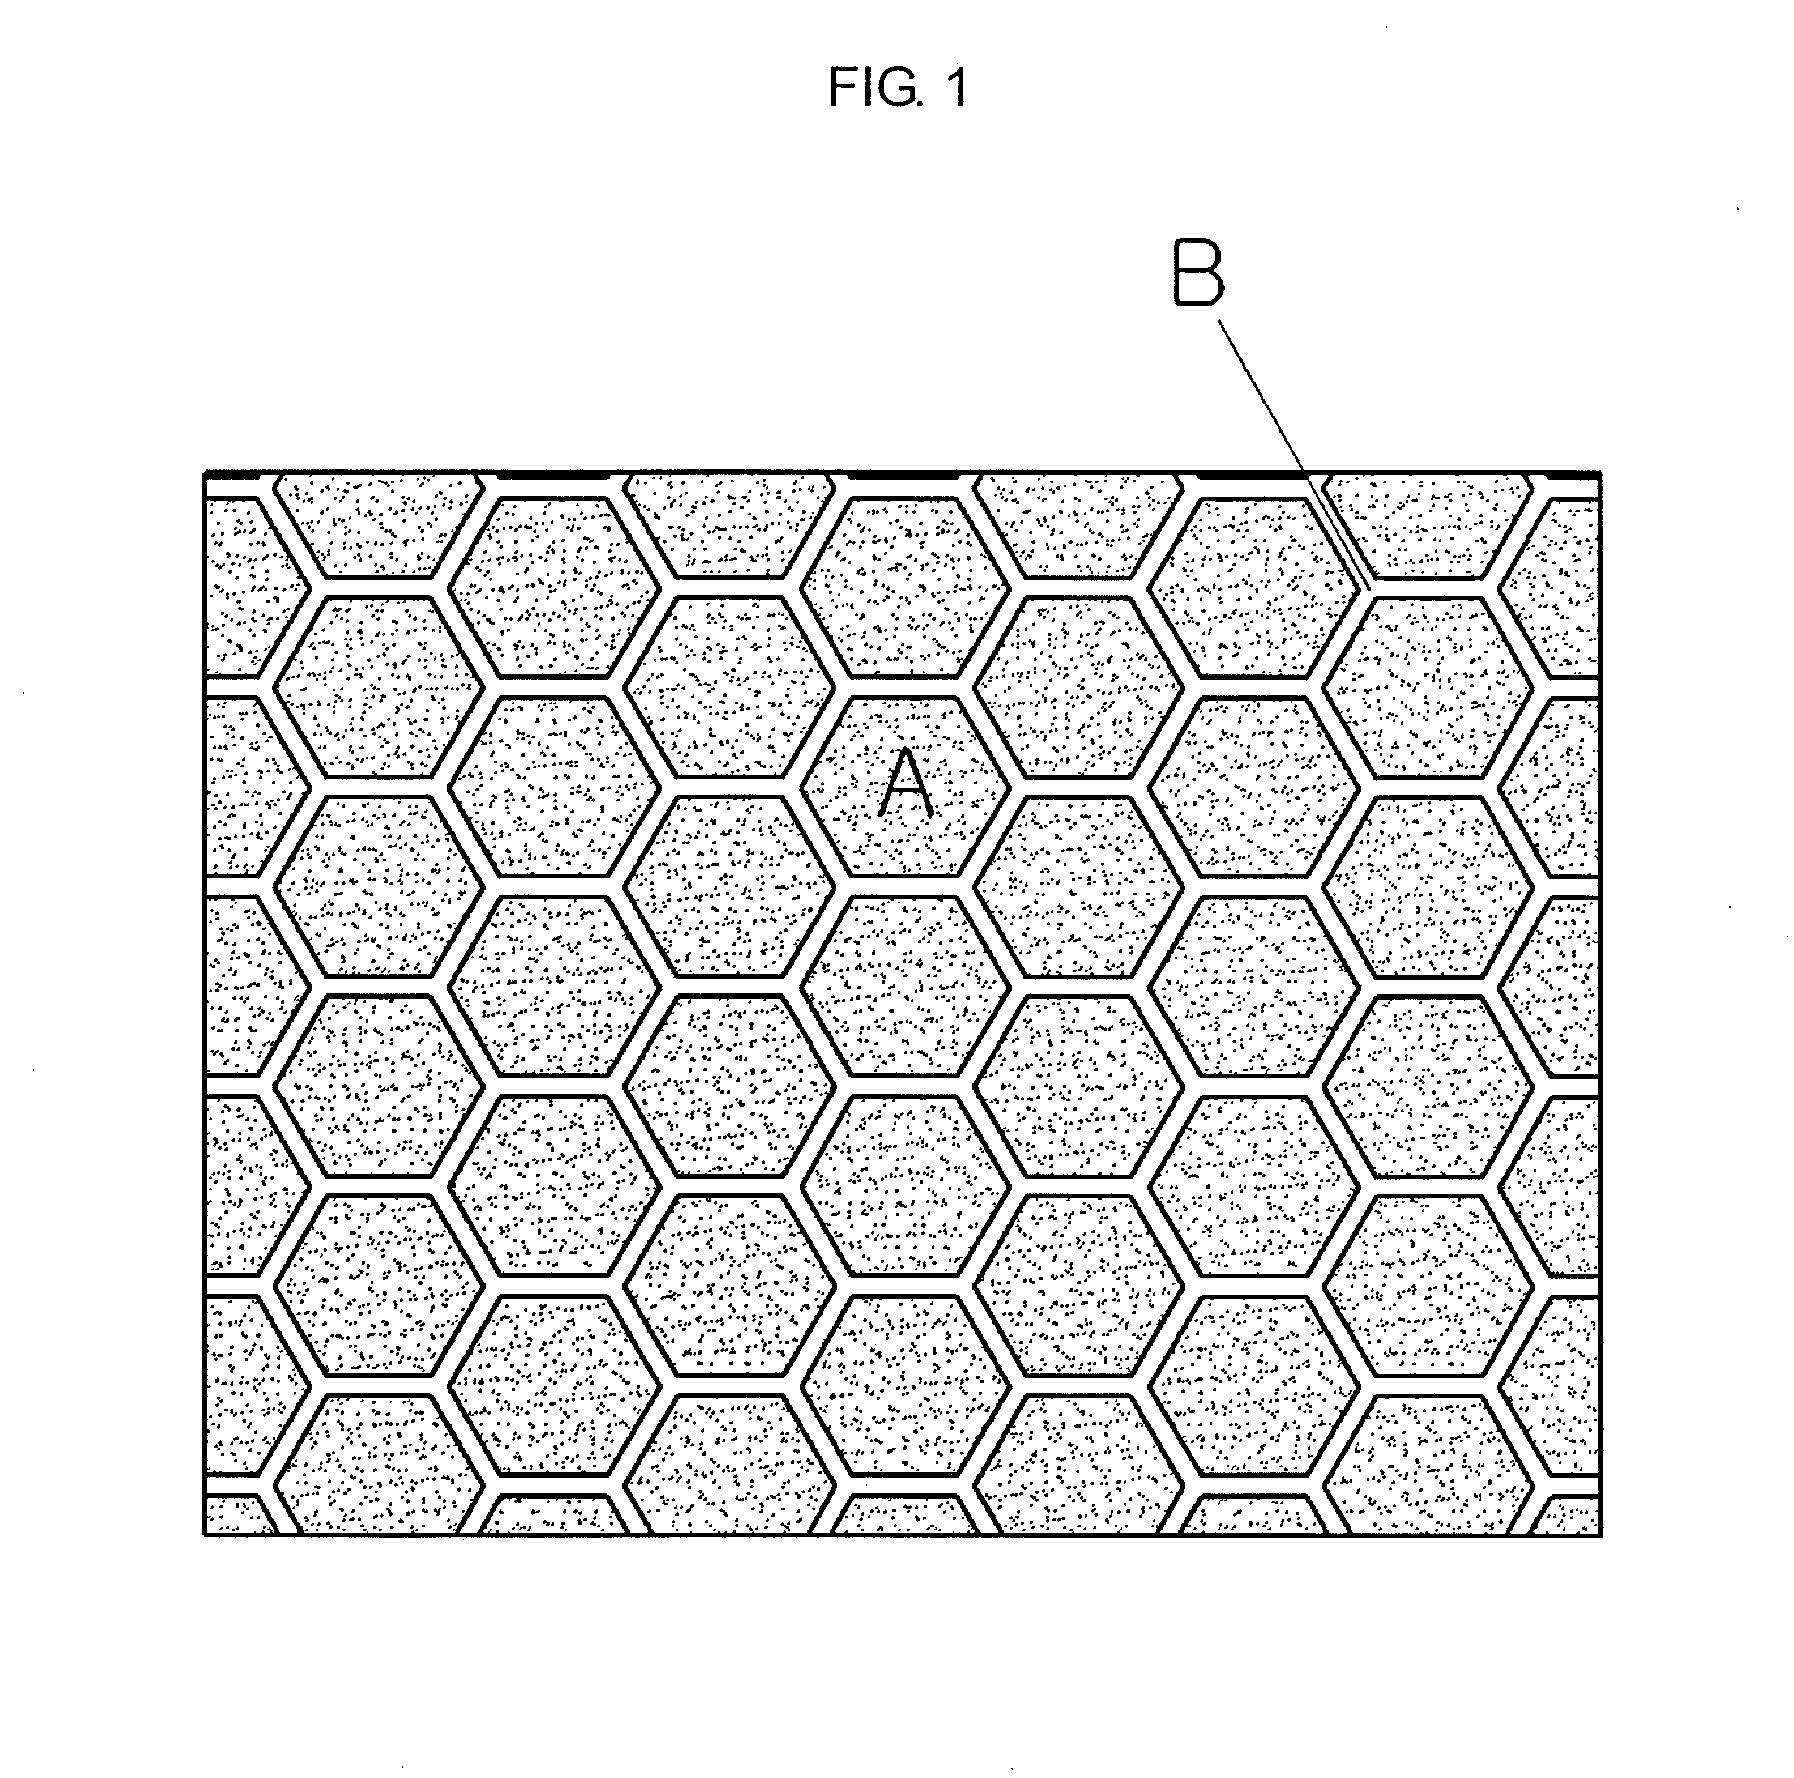 Ceria-based composition including bismuth oxide, ceria-based composite electrolyte powder including bismuth oxide, method for sintering the same and sintered body made thereof